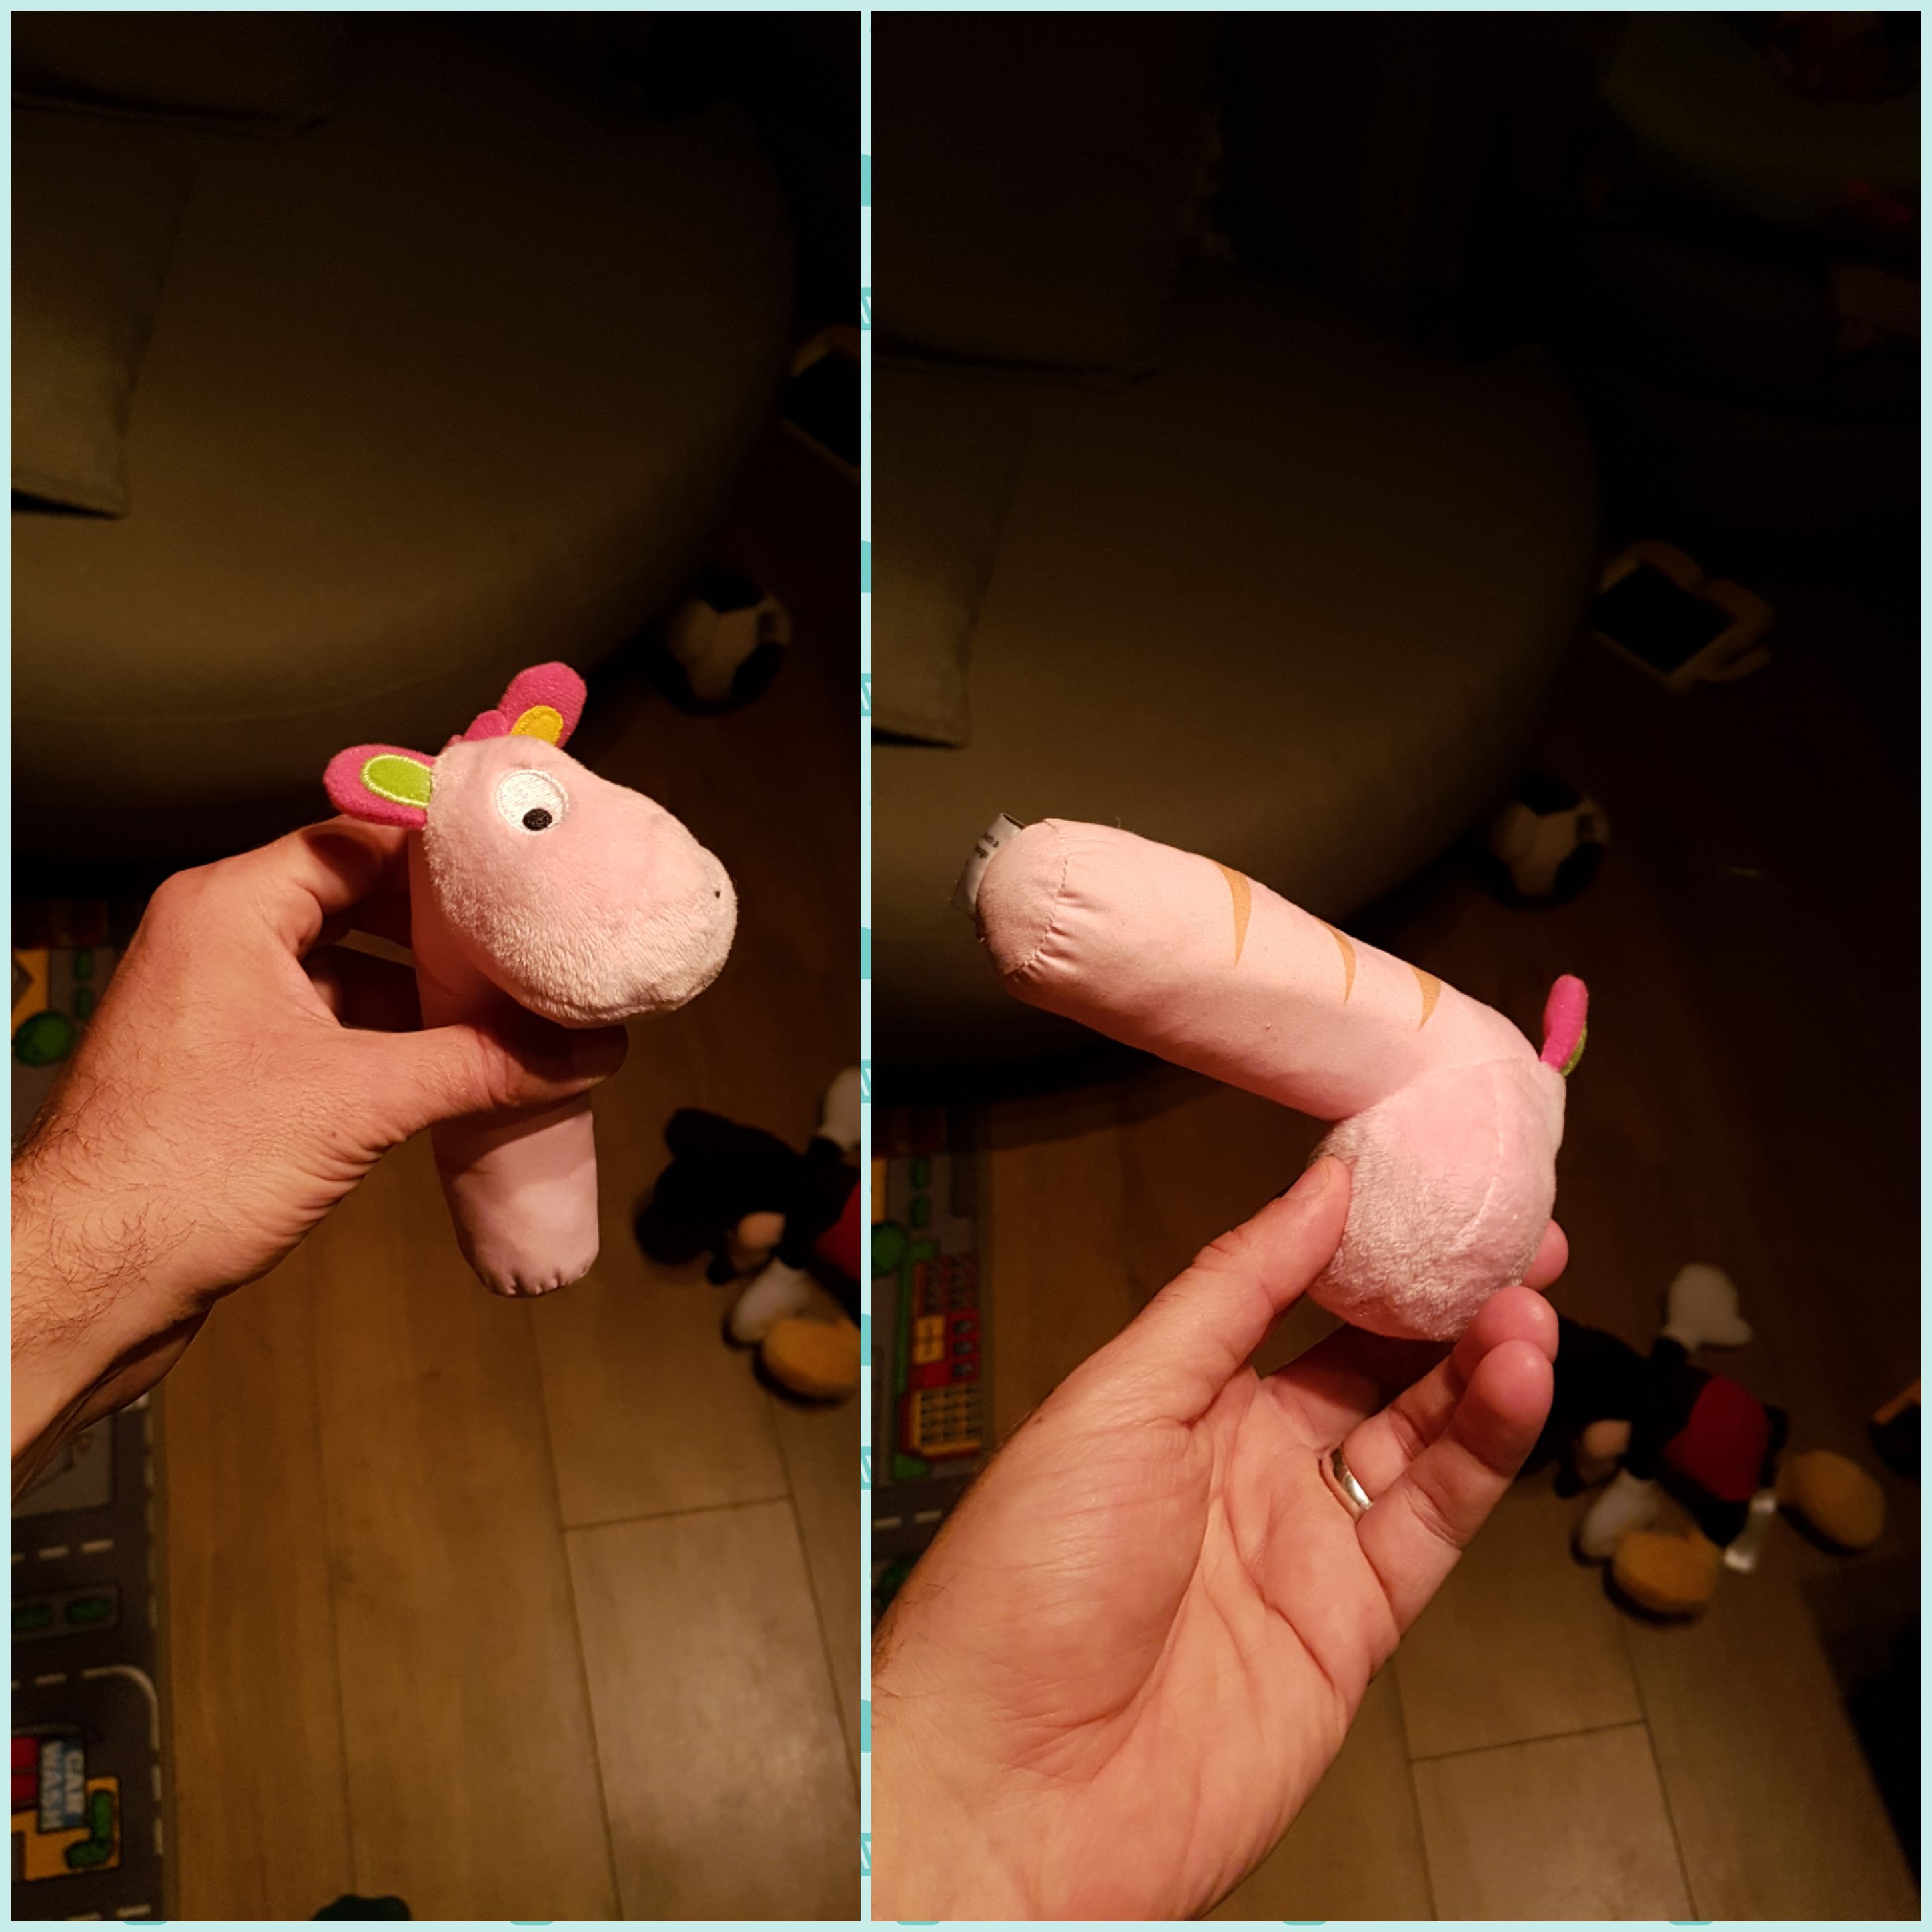 Well, thats my daughters toy going in the bin. Can't believe I didn't notice earlier.